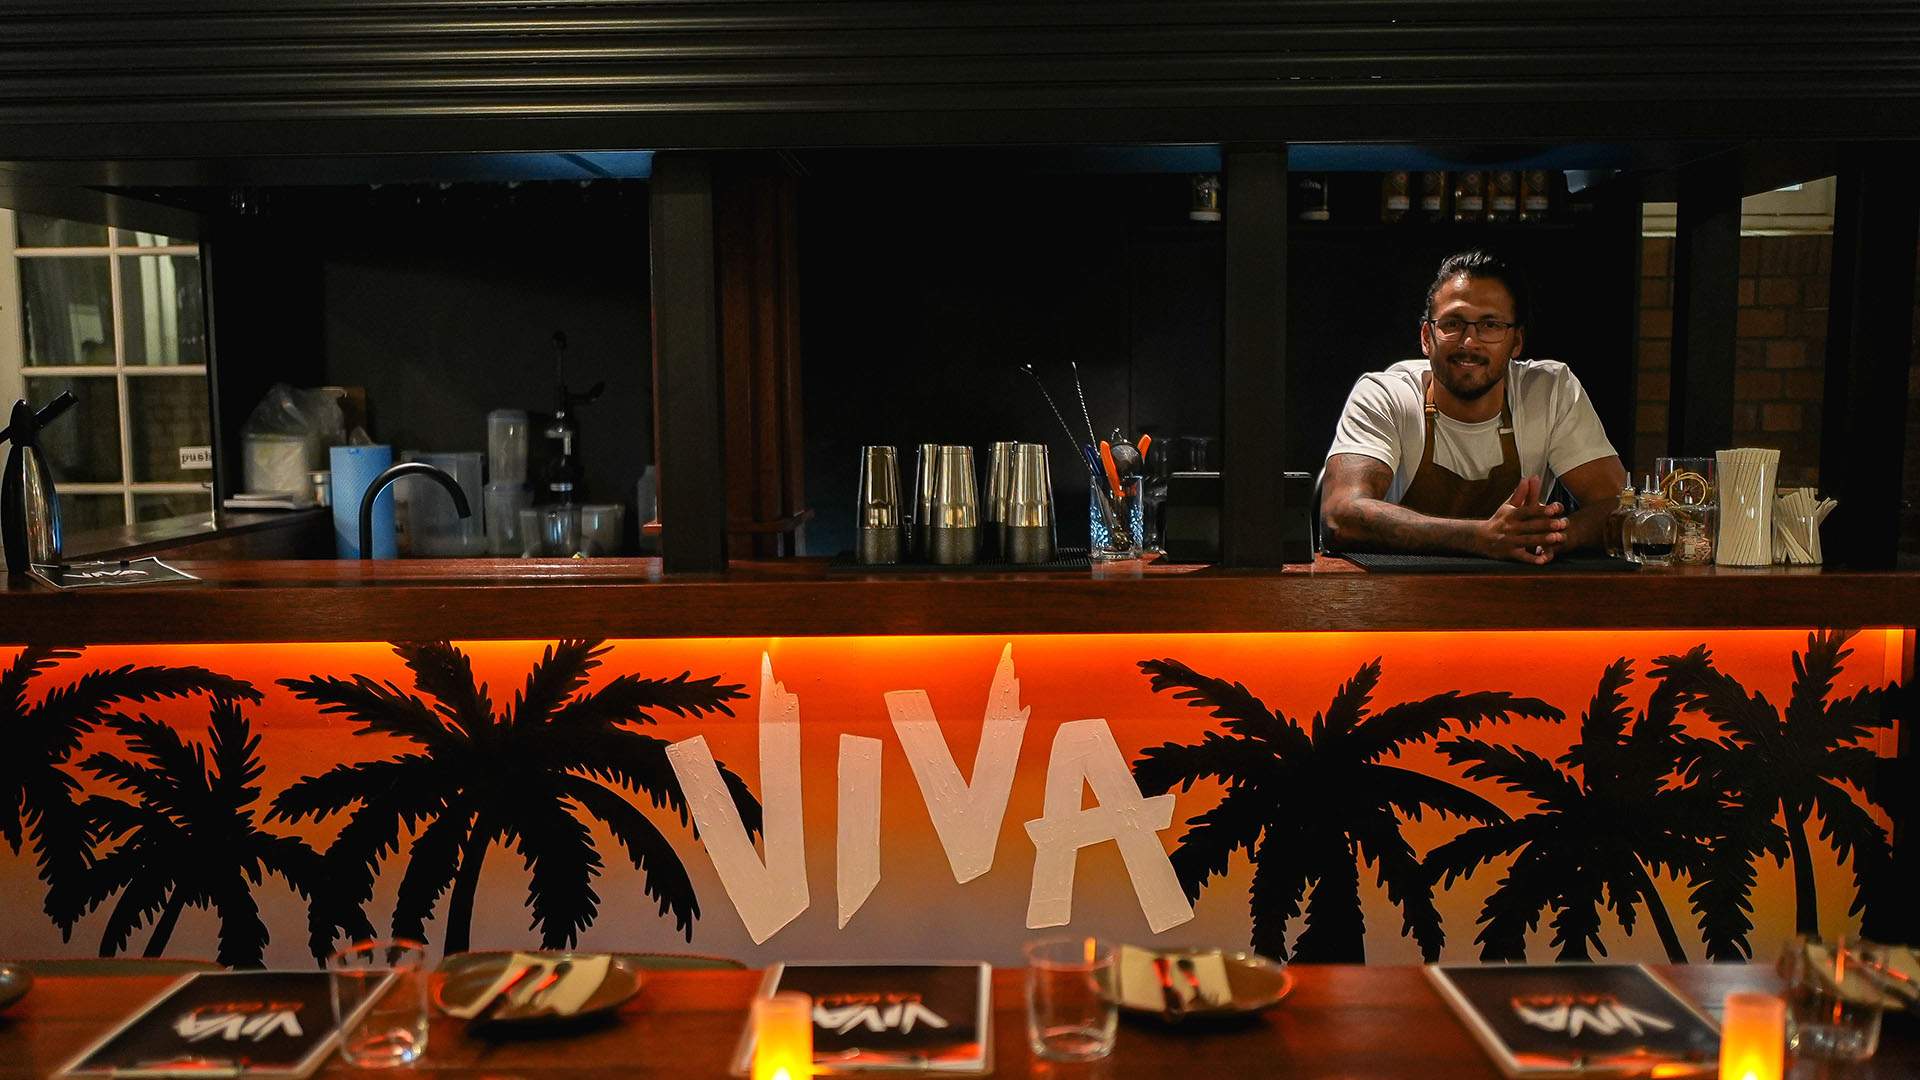 Now Open: The 1st Edition Crew's New Bar and Restaurant Viva La Cali Has Landed in California Lane